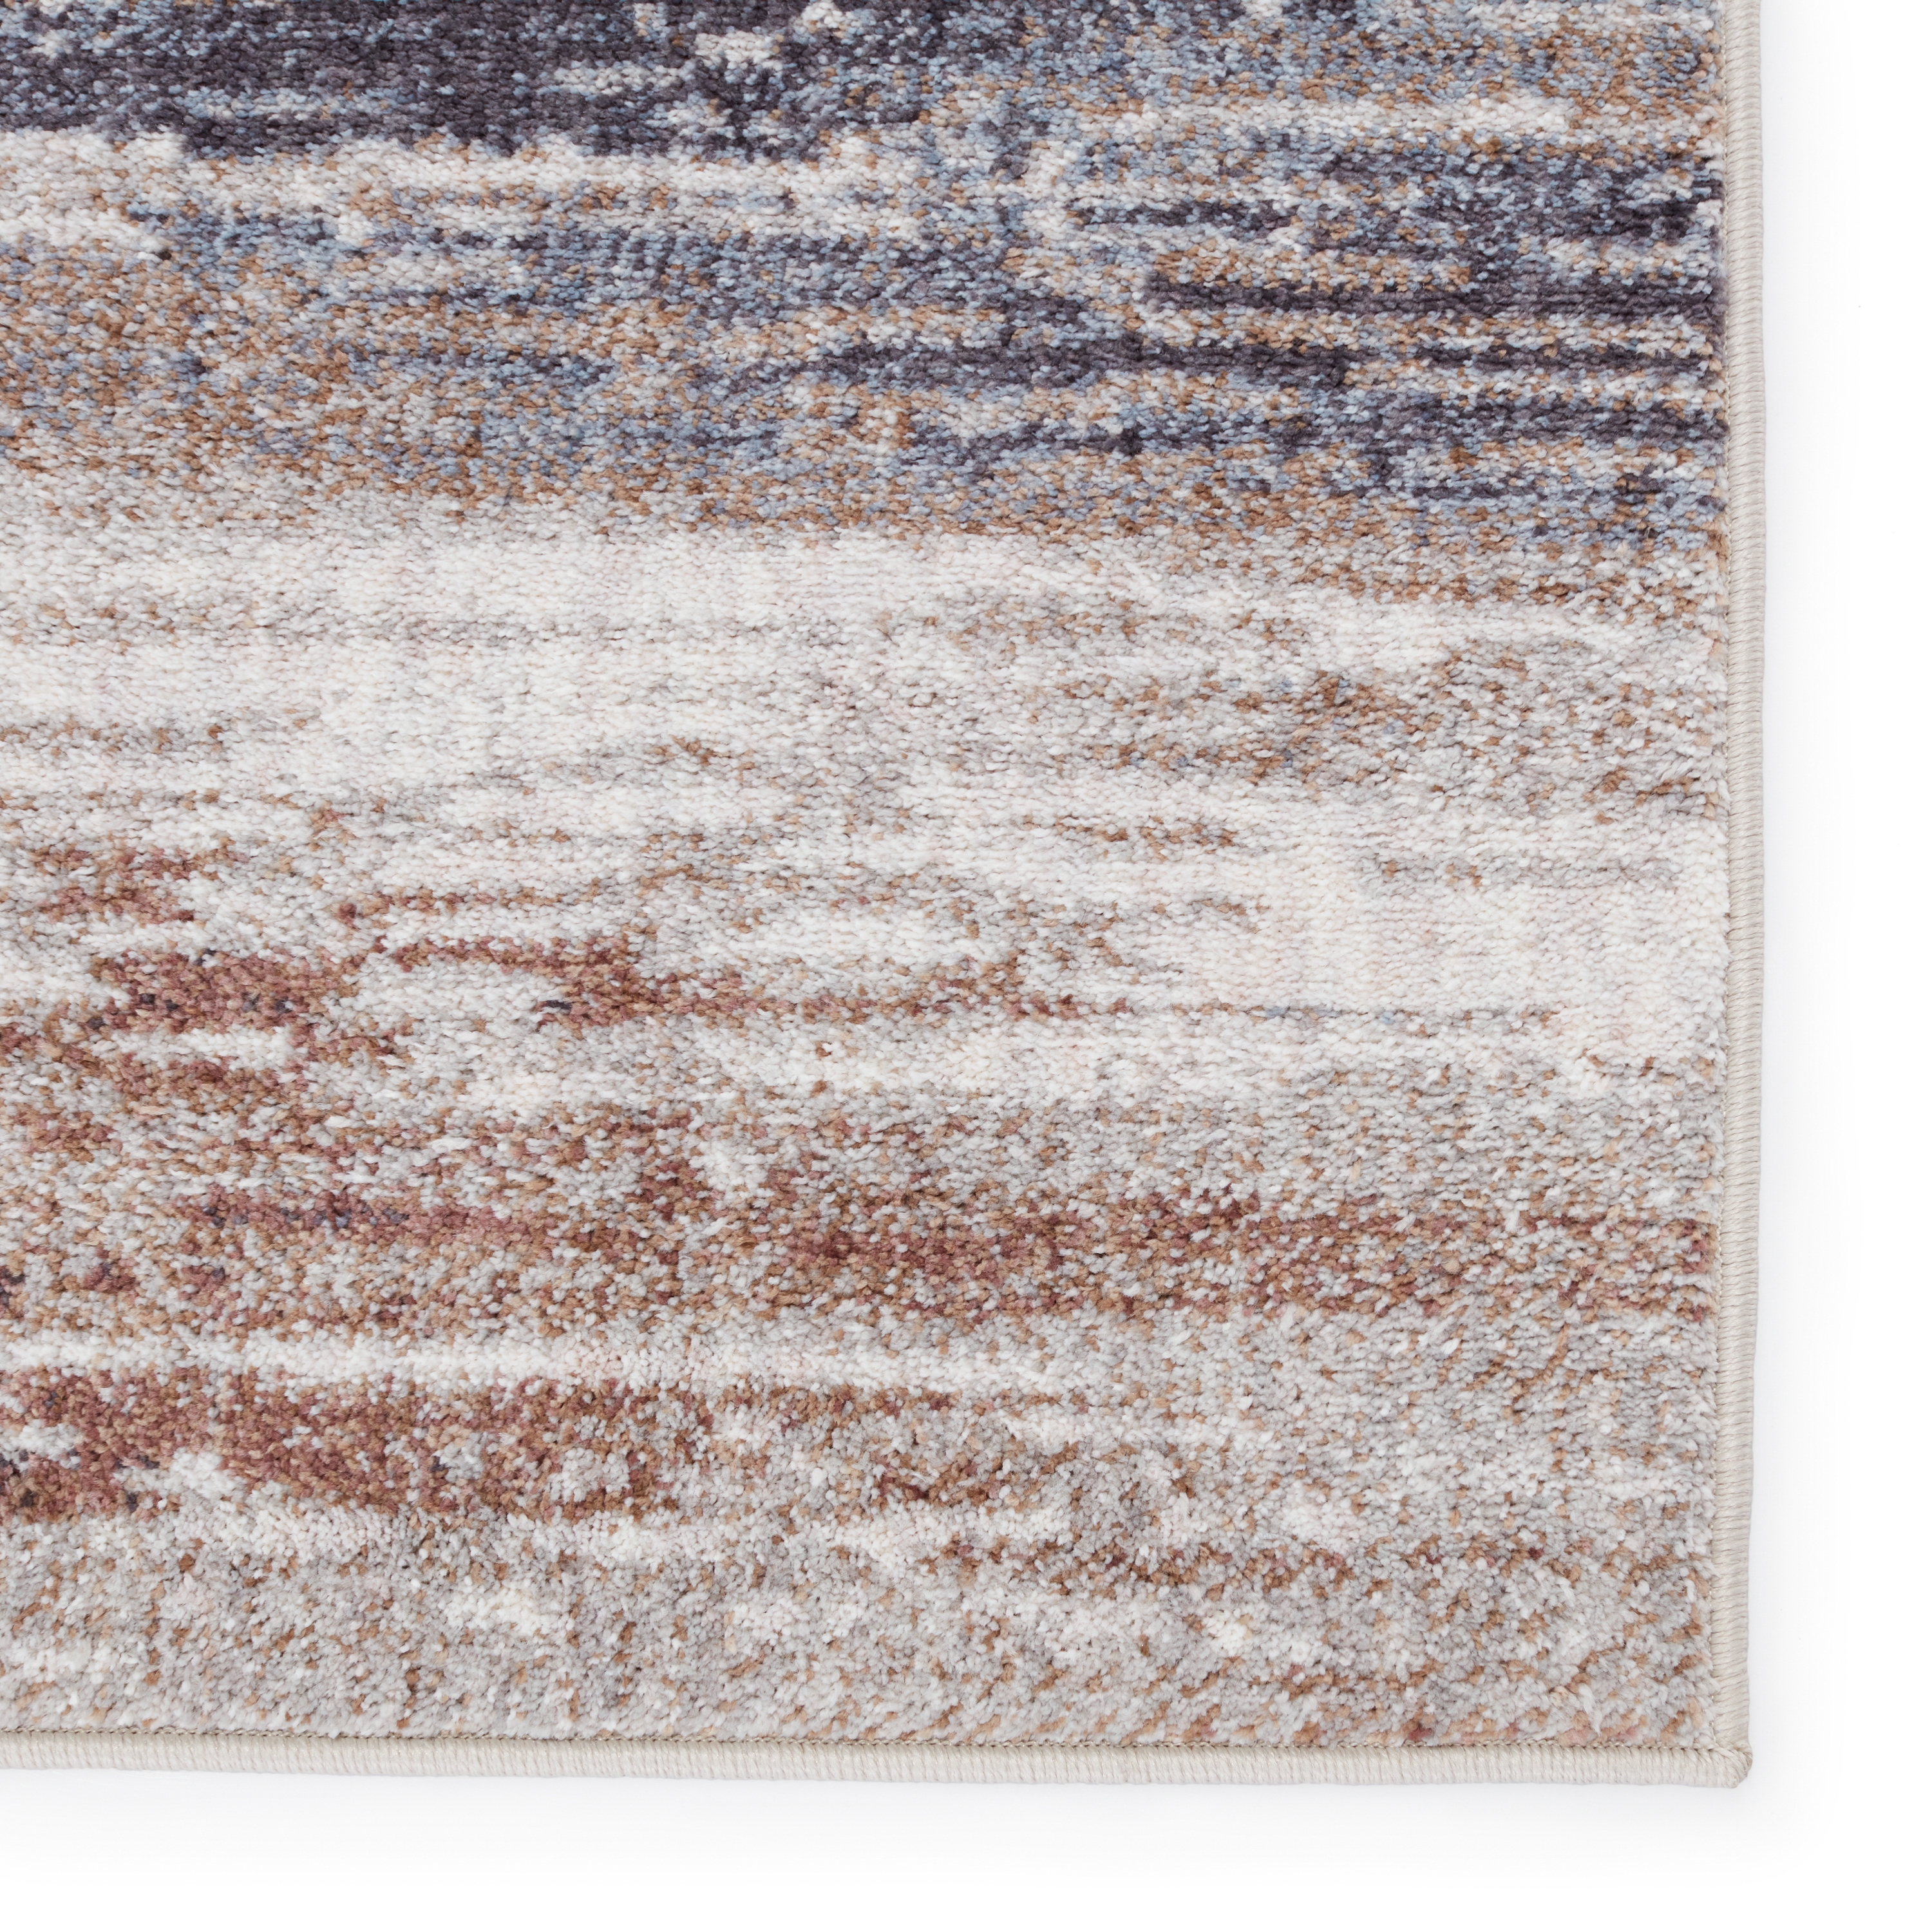 Vibe by Oberon Abstract Light Gray/ Brown Area Rug (10'X14') - Image 3